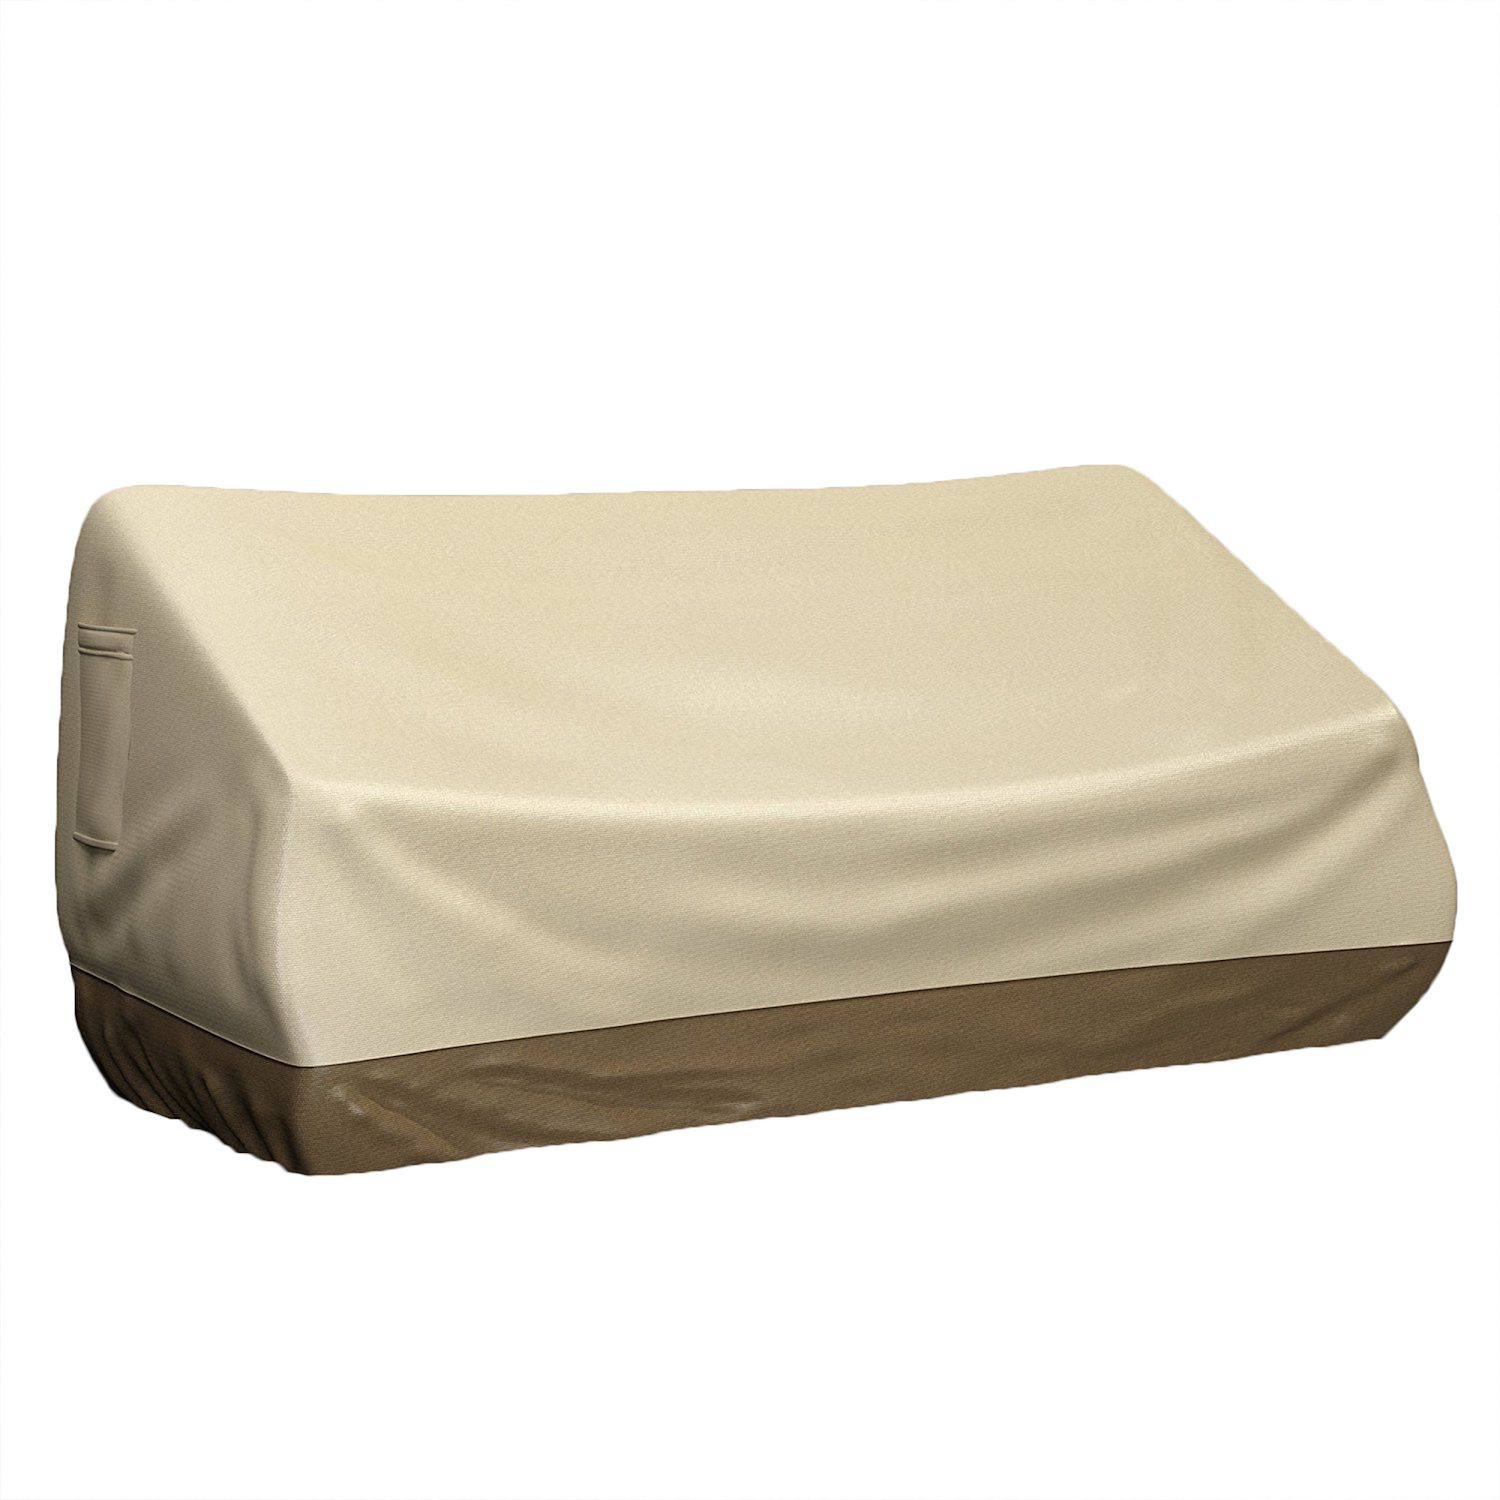 Image for Hastings Home Outdoor Loveseat or Sofa Patio Cover at Kohl's.